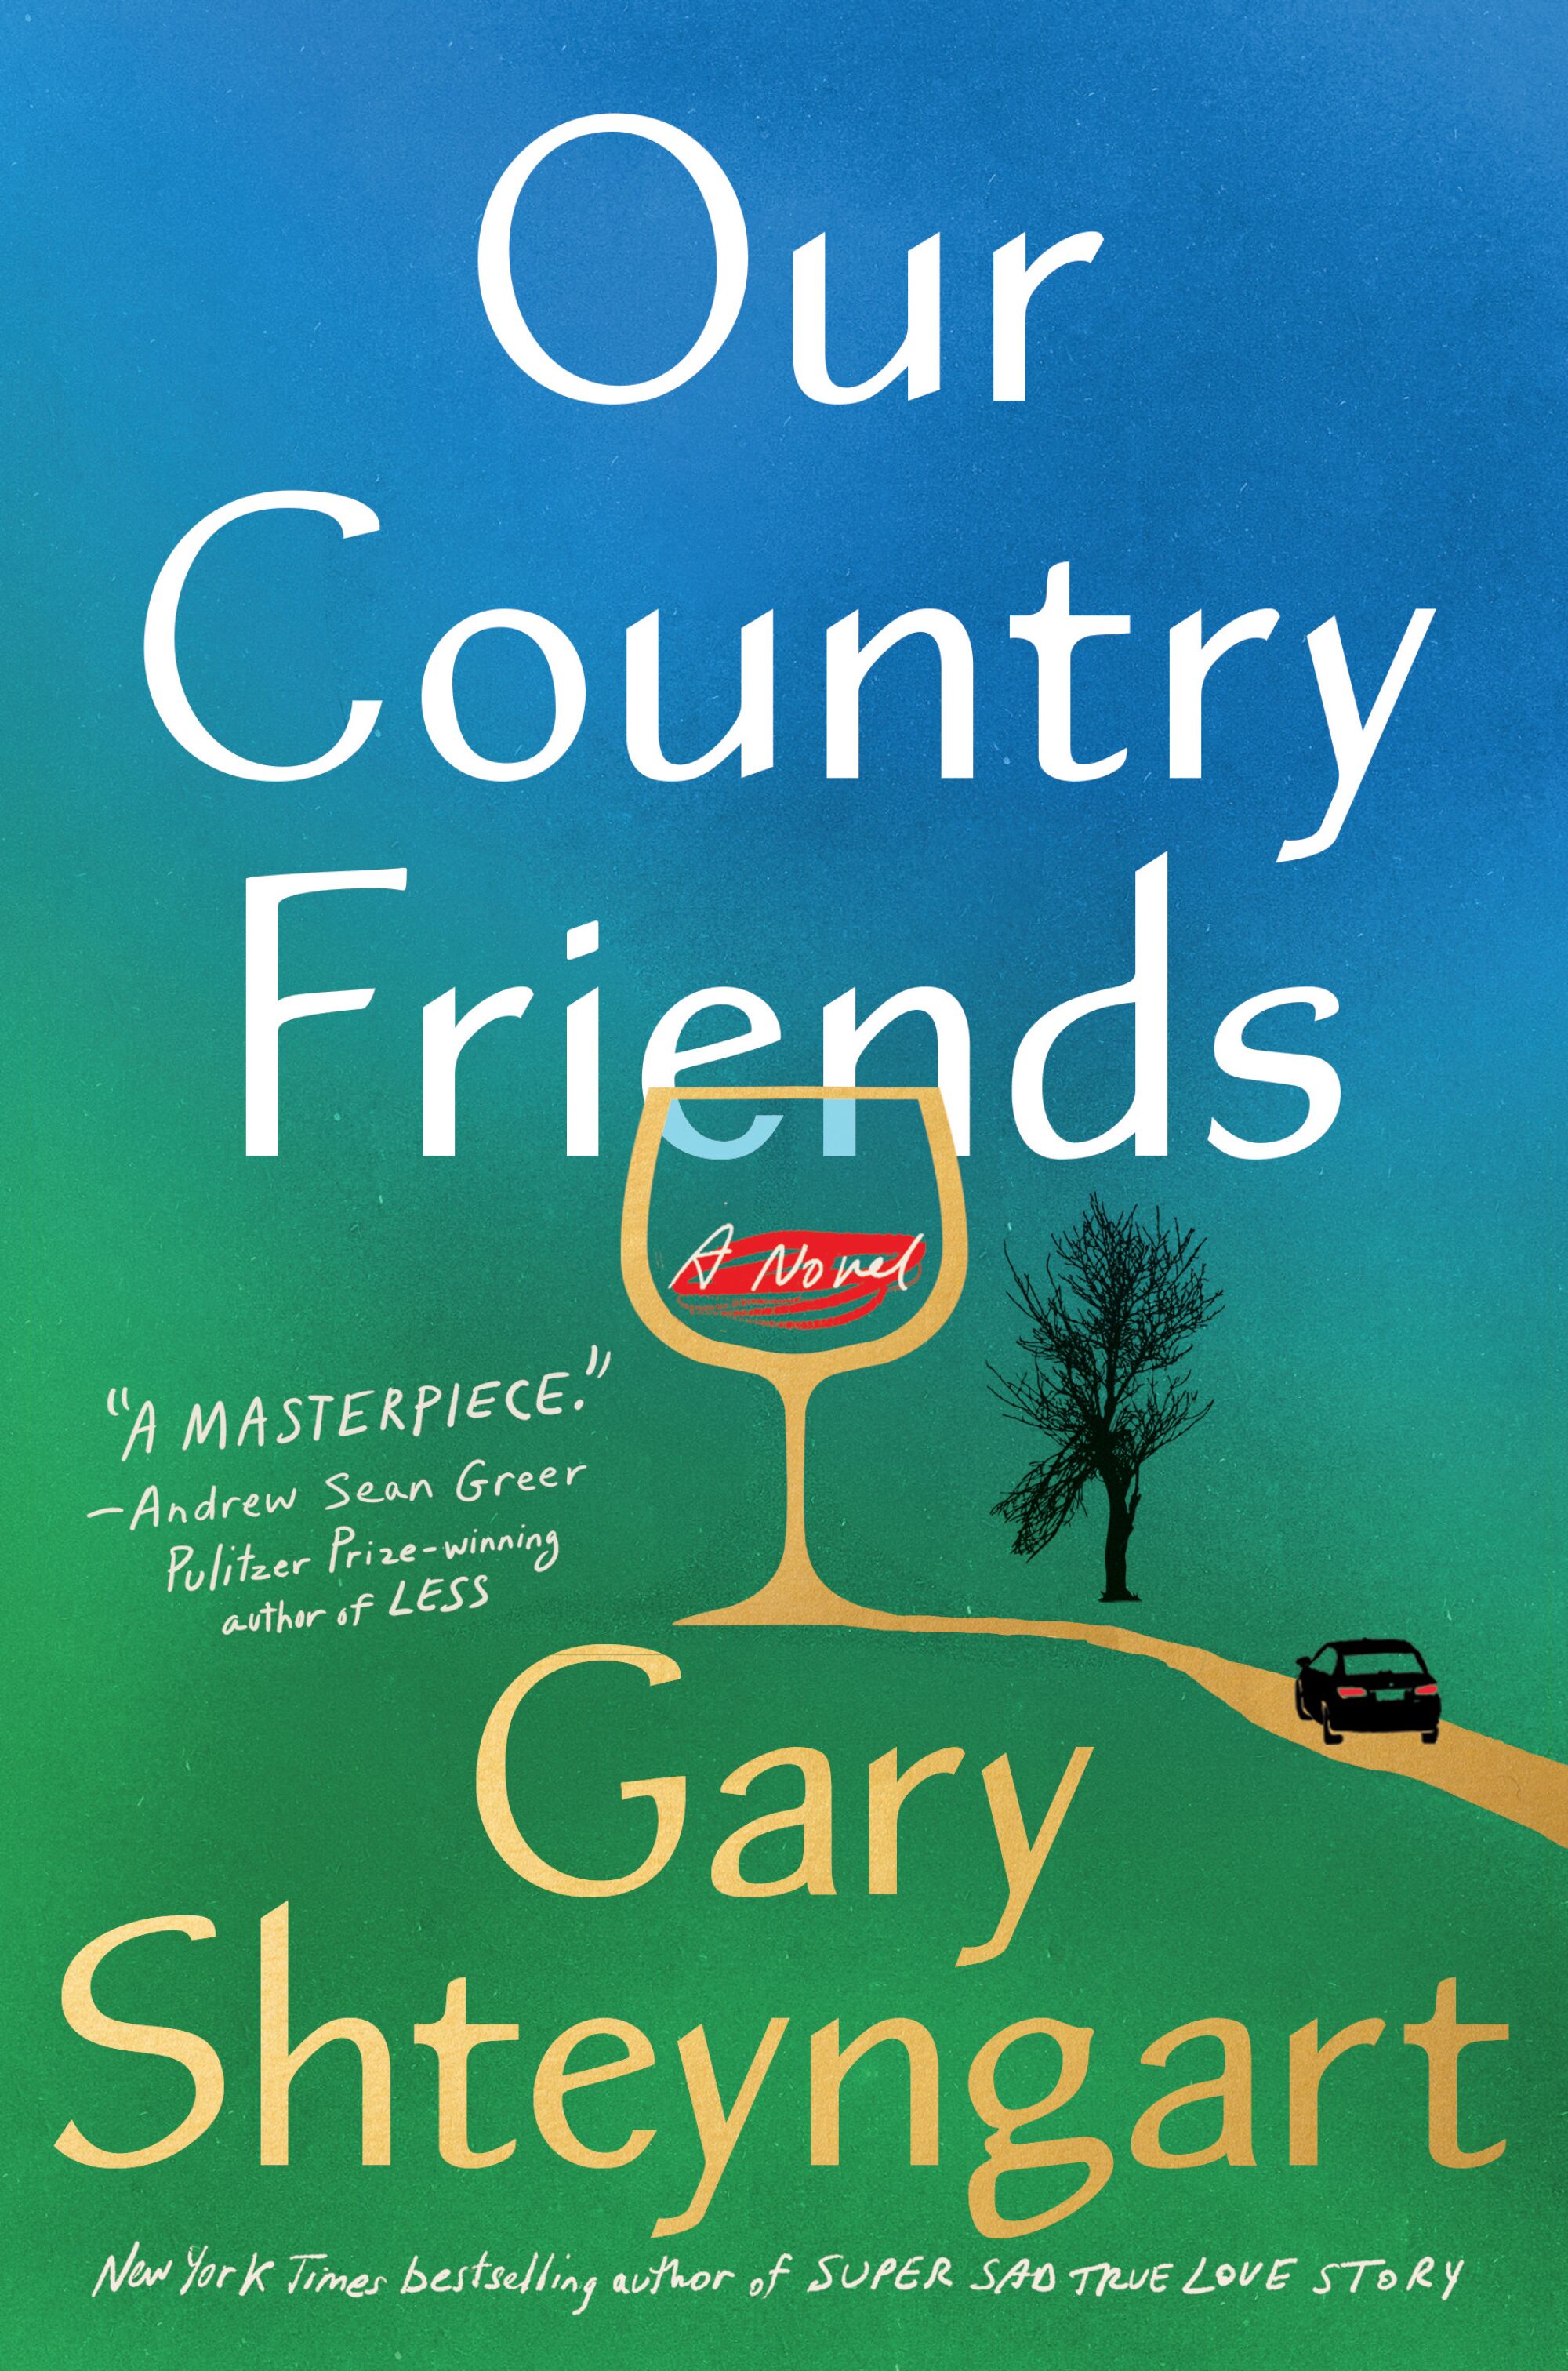 A drawing of a wine glass and a country road on the cover of "Our Country Friends," by Gary Shteyngart